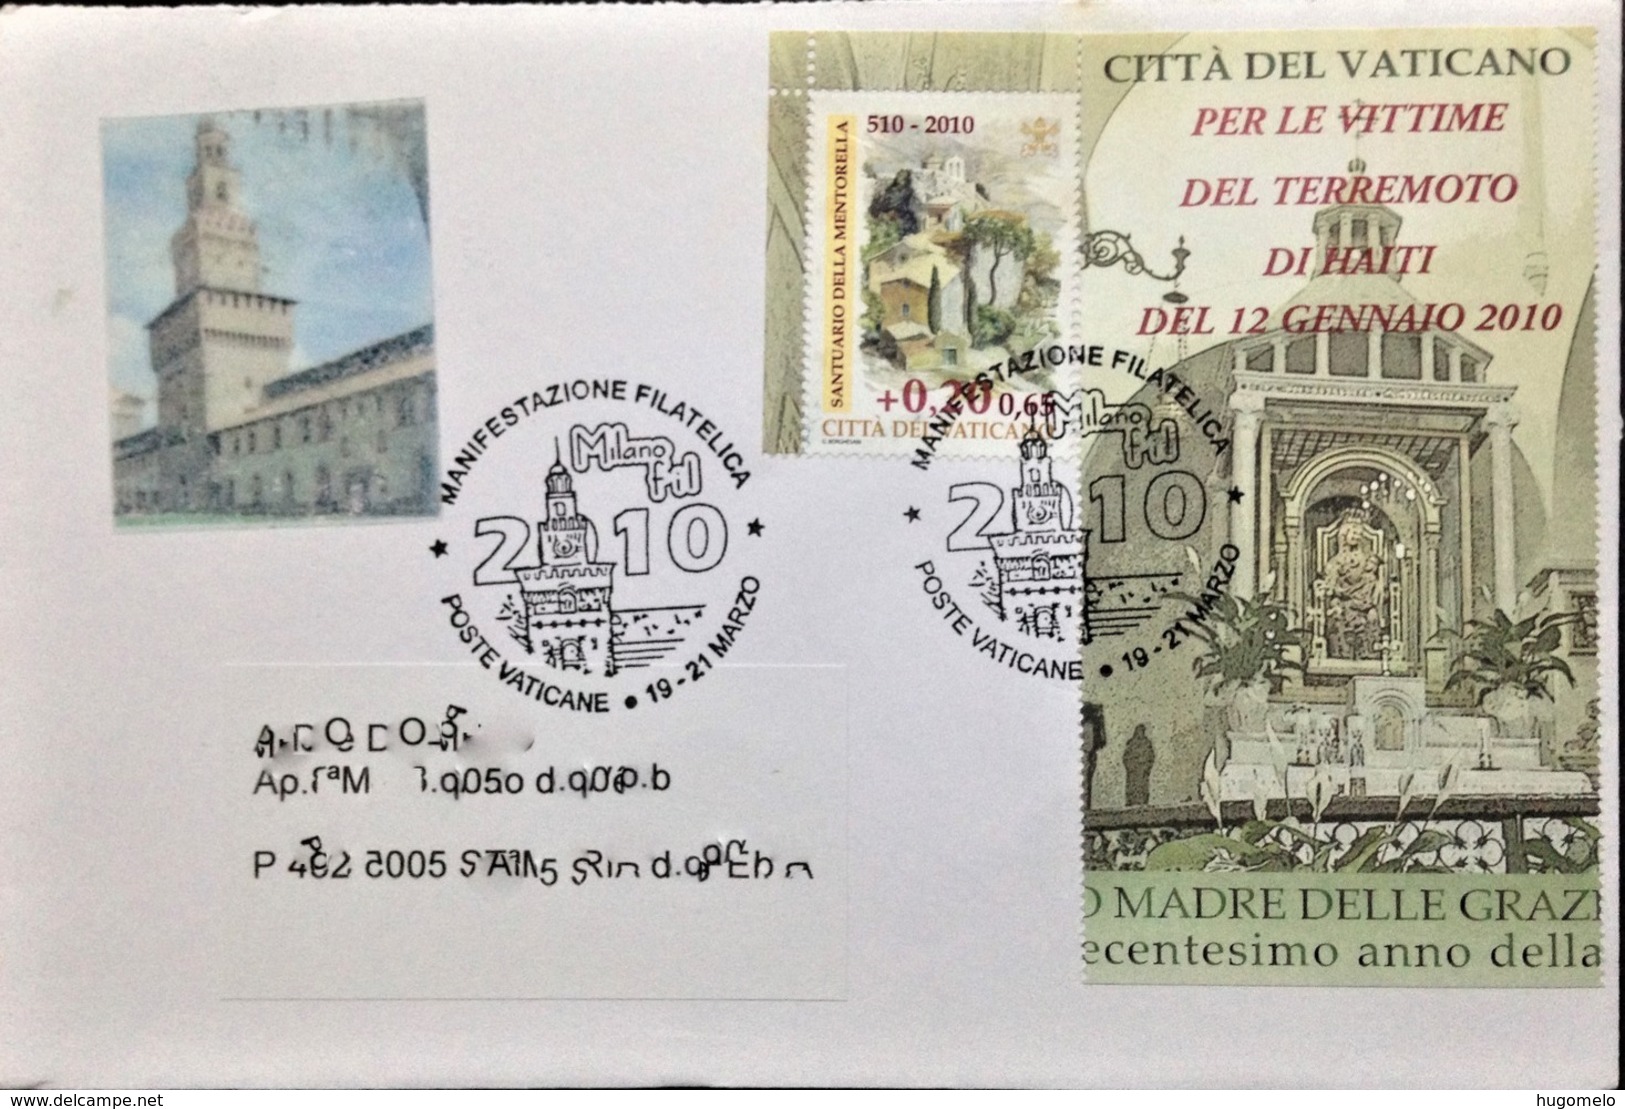 Vatican, Circulated Cover To Portugal, "Filatelic Event", "MilanoFIL", "Sanctuaries", "Architecture", "Earthquakes",2010 - Covers & Documents